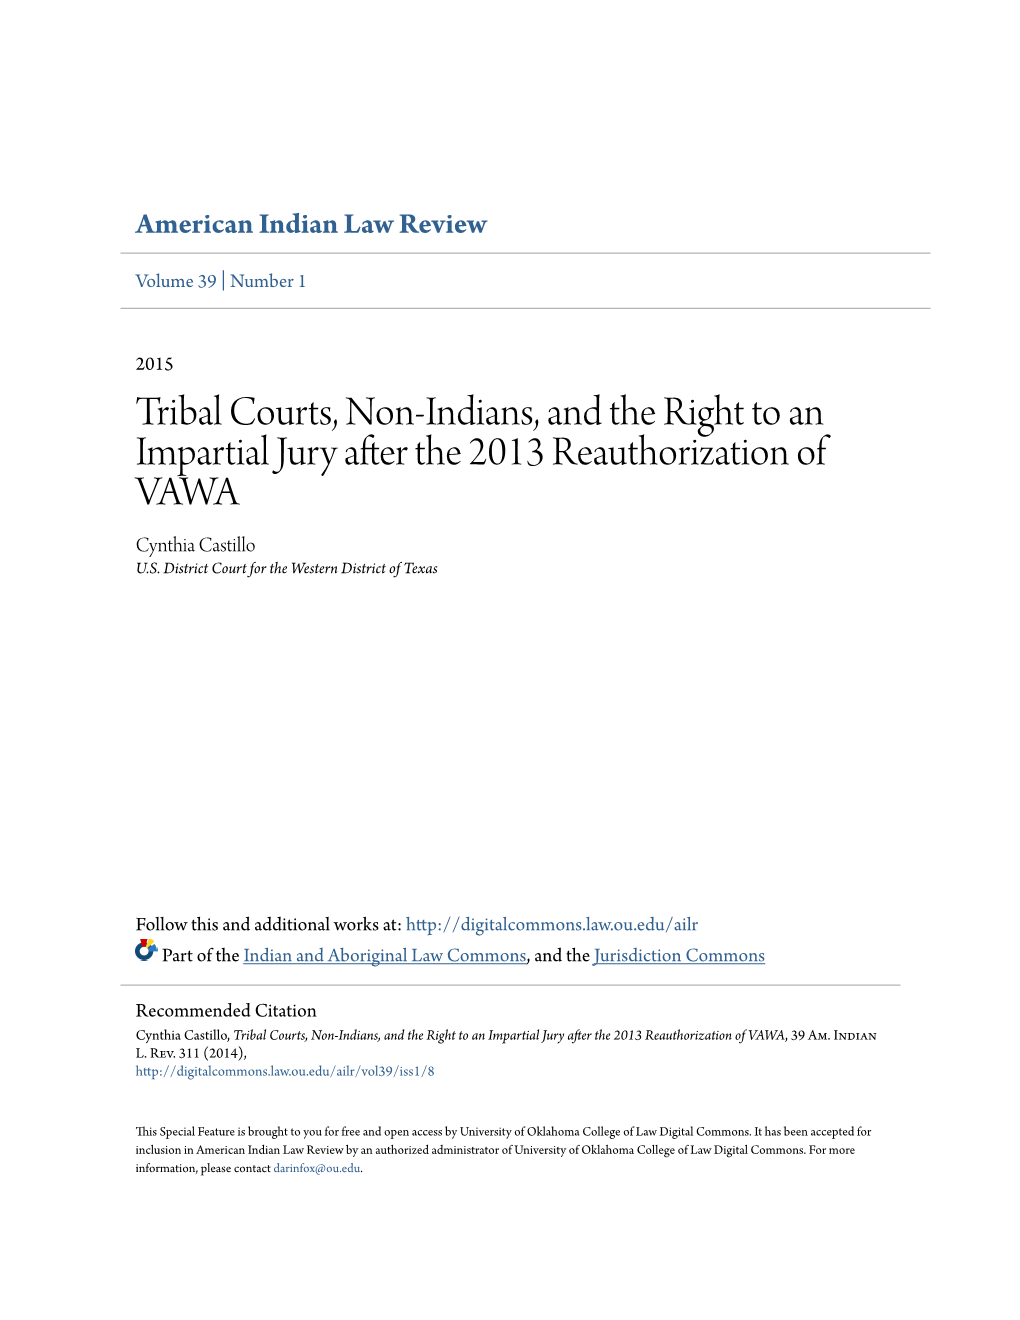 Tribal Courts, Non-Indians, and the Right to an Impartial Jury After the 2013 Reauthorization of VAWA Cynthia Castillo U.S